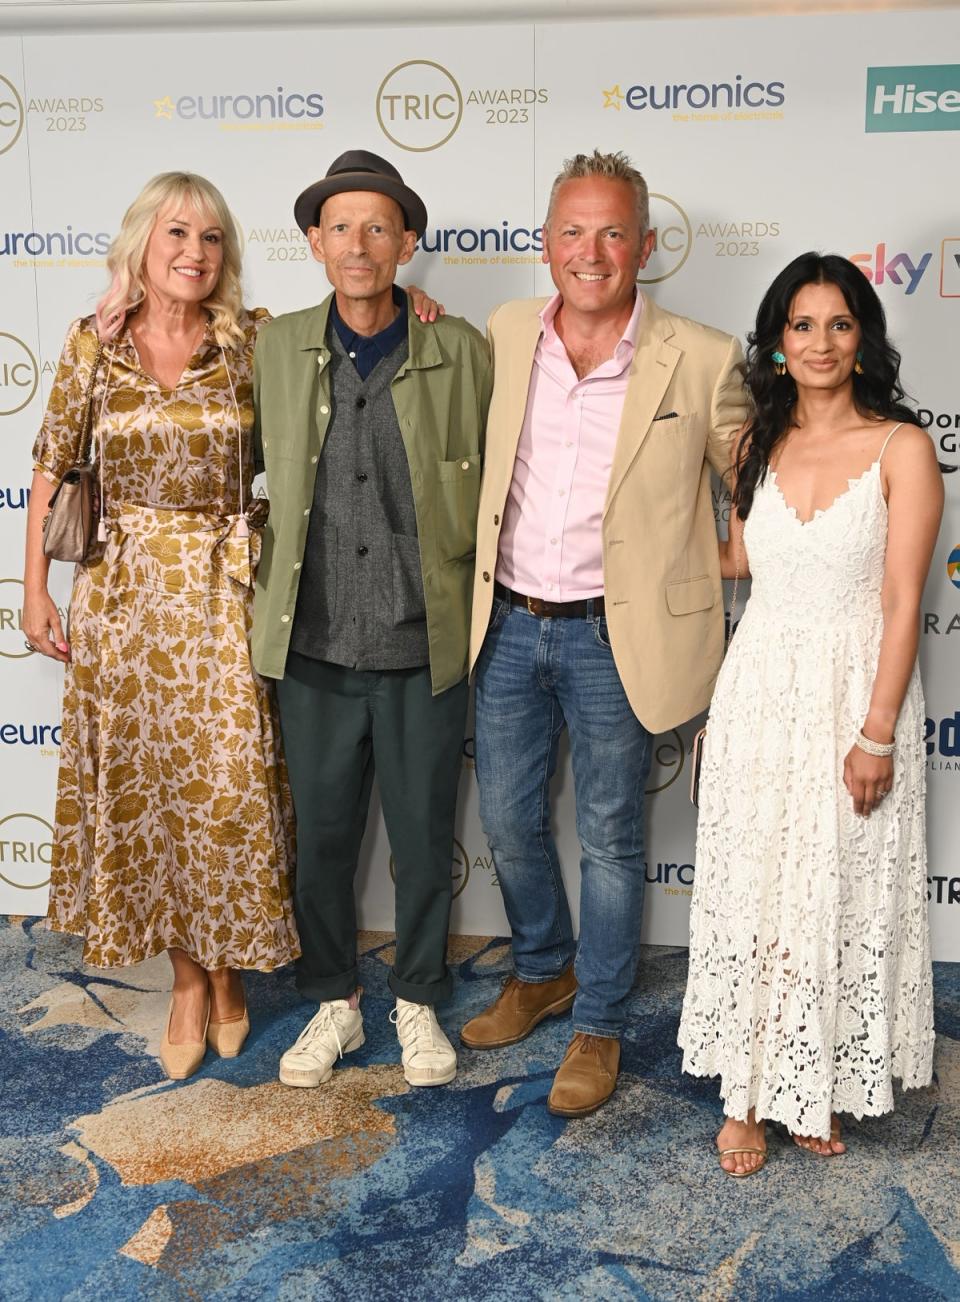 Jonnie Irwin pictured with Nicki Chapman, Jules Hudson and Sonali Shah (Getty Images)